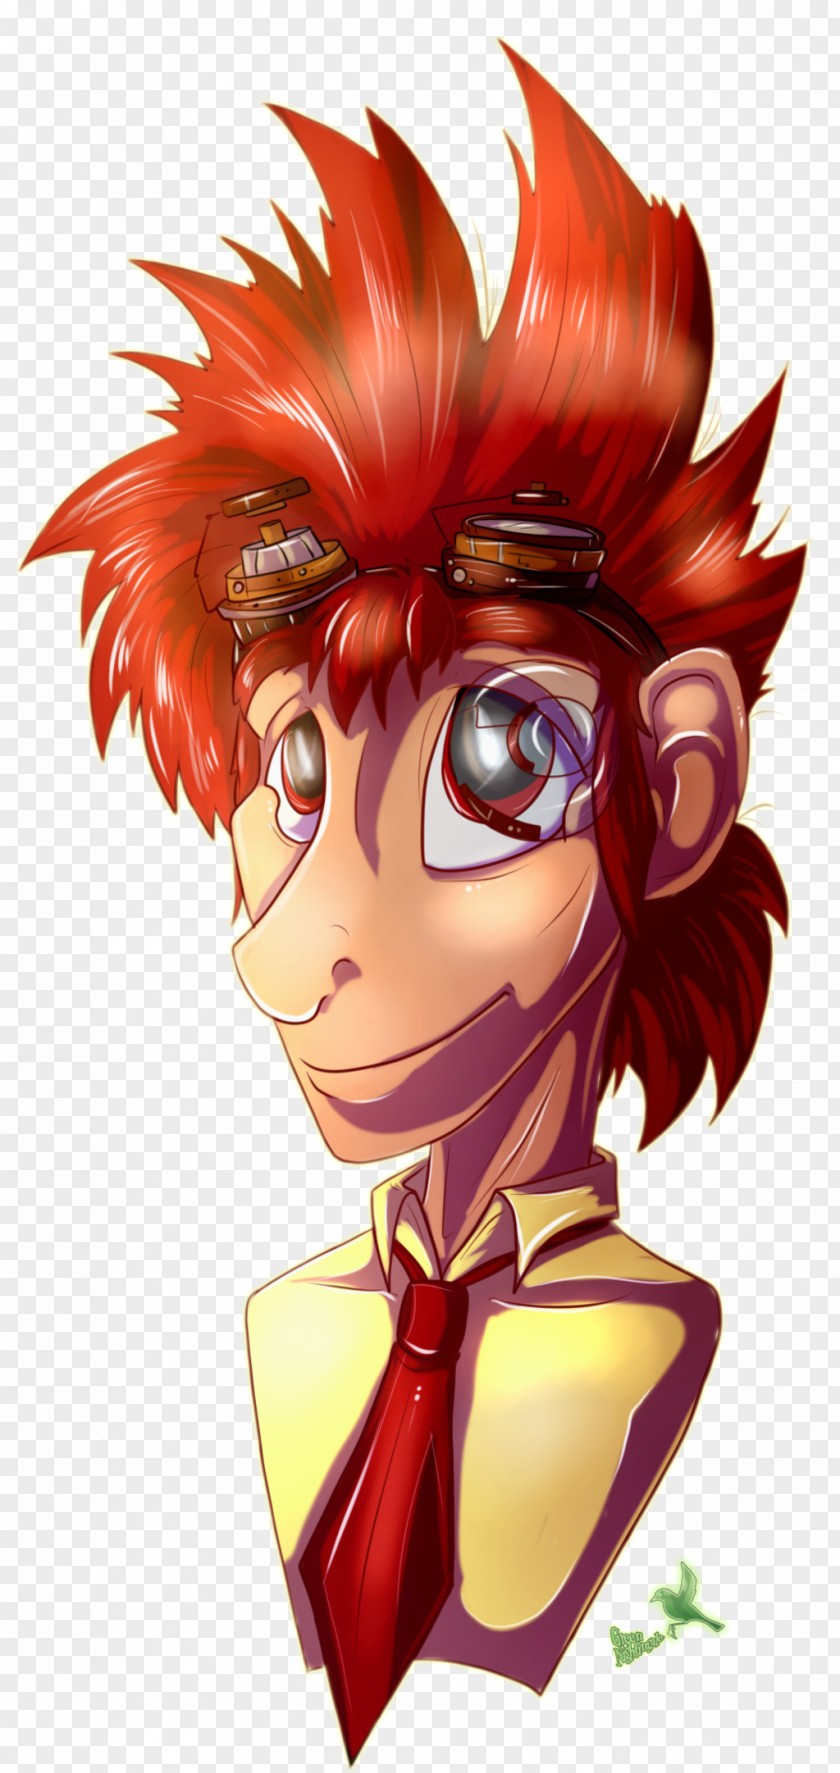 Rus' People Red Hair Coloring Legendary Creature Cartoon PNG